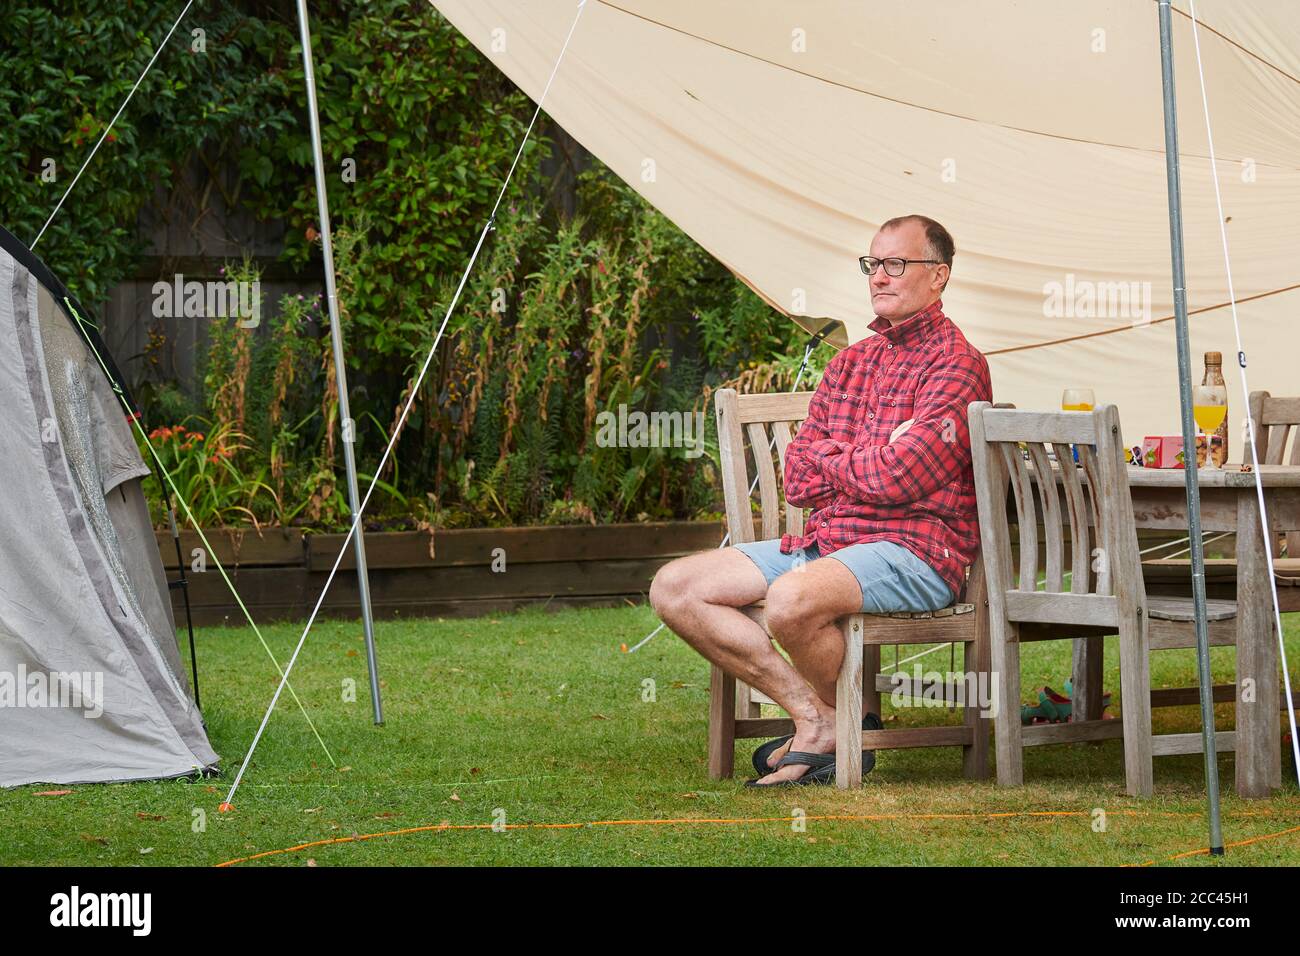 A middle aged man sits cross-armed in pensive thought under a tent awnng on a rainy day in his staycation back garden holiday. Stock Photo